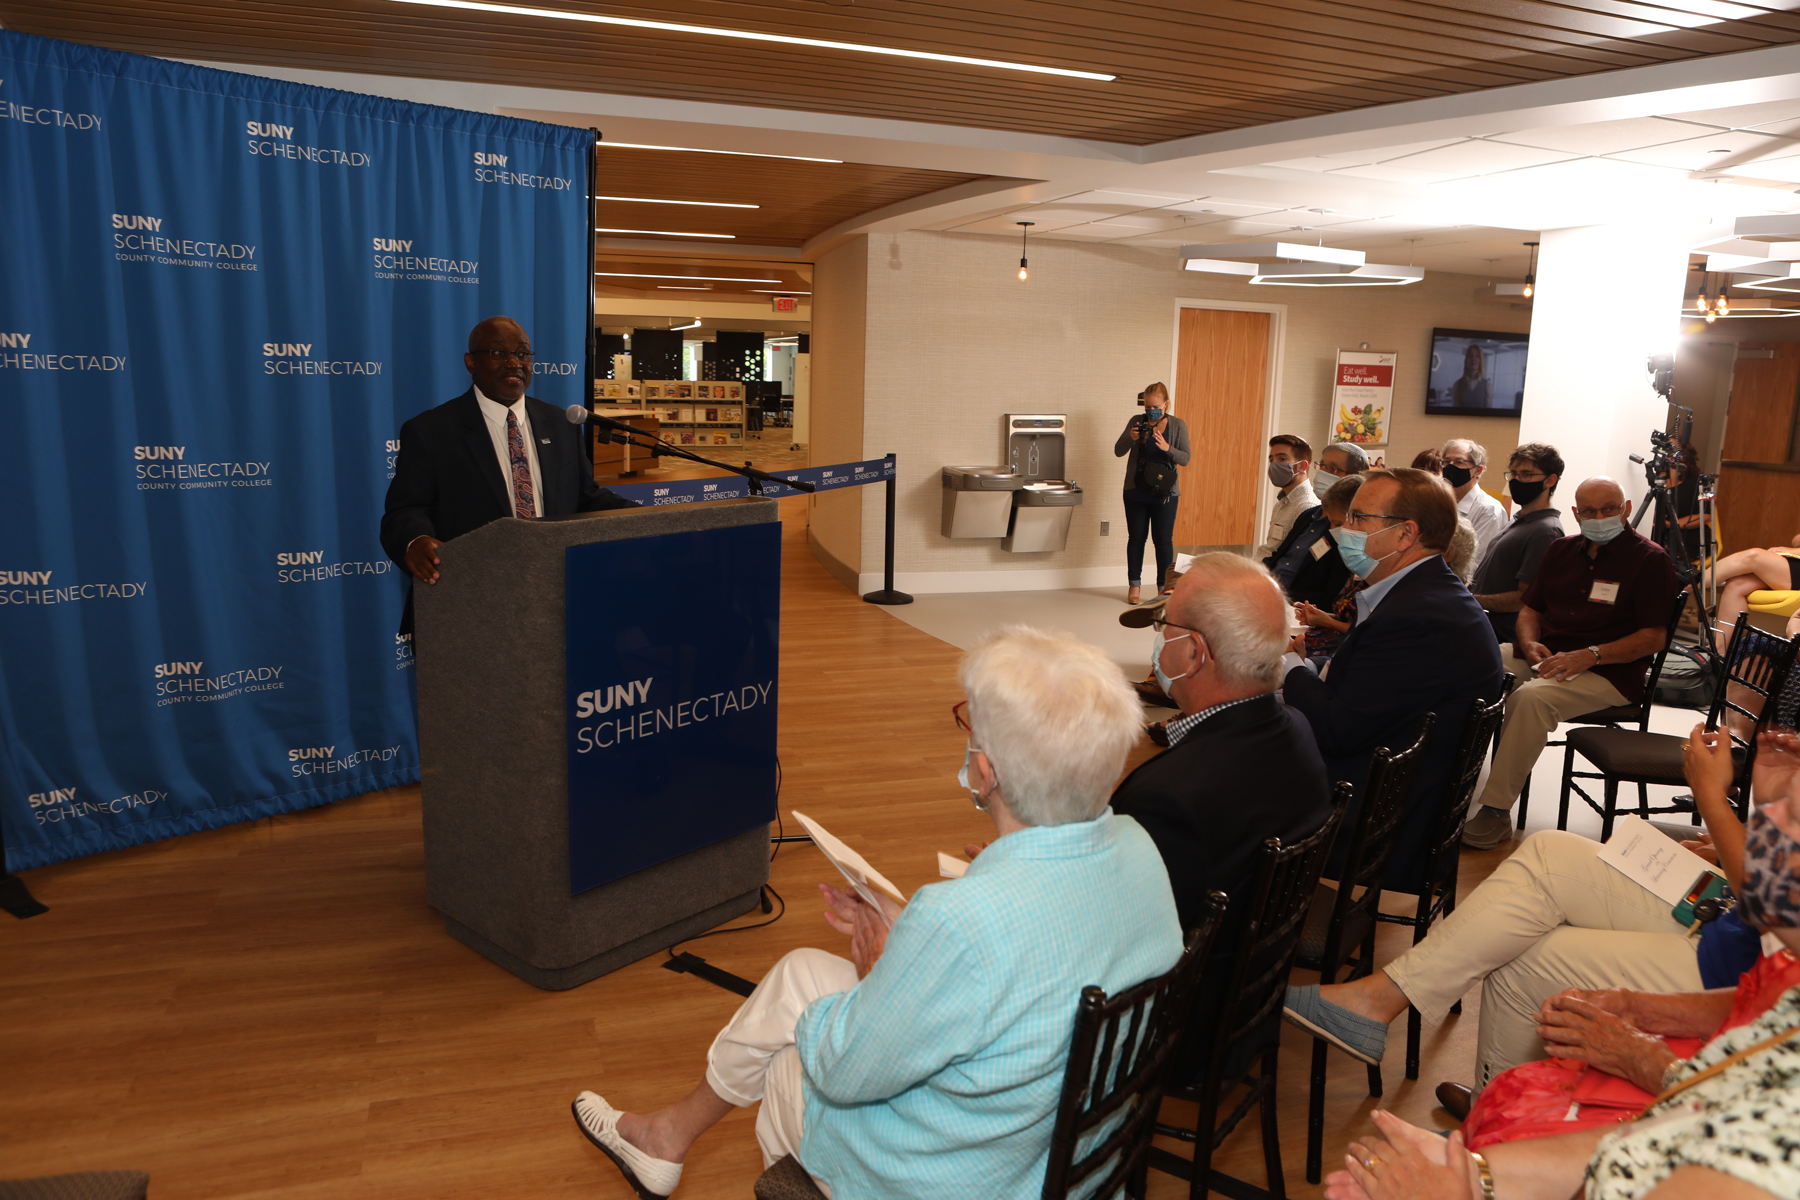 Dr. Moono at podium talking to donors during Grand Opening